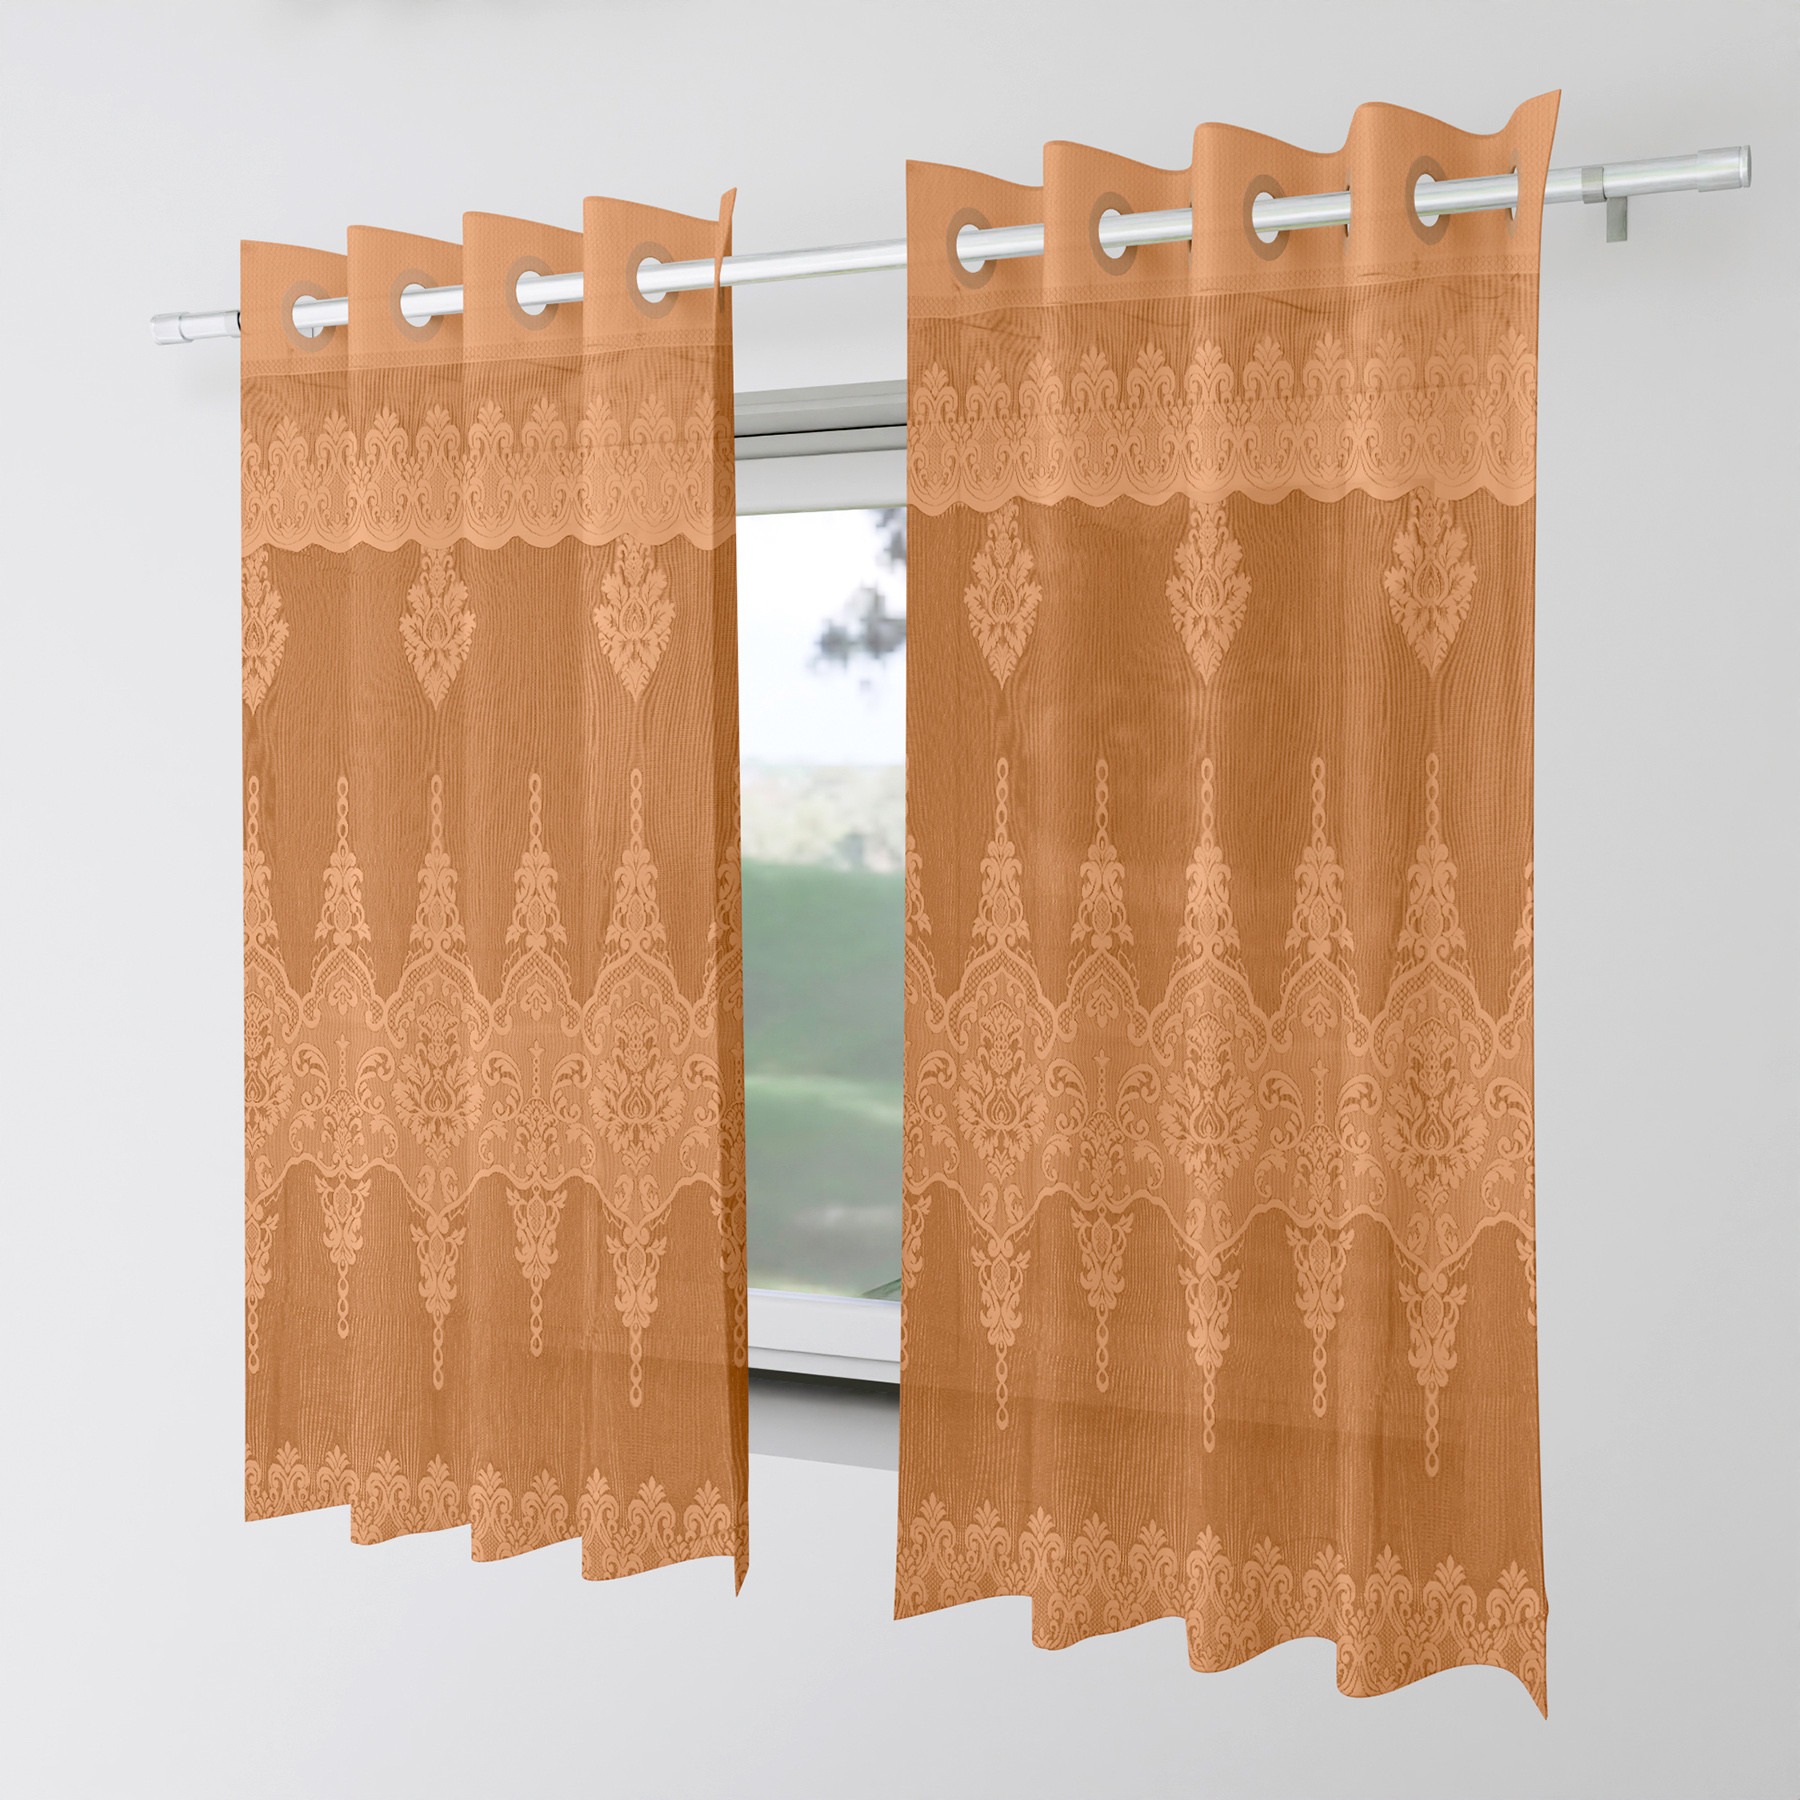 Kuber Industries Window Curtain | Darkening Window Curtains | Sheer Curtain with 8 Rings | Parda for Living Room | Drapes for Bedroom | Net Frill Window Curtain | 5 Ft | SY15ZZ | Golden